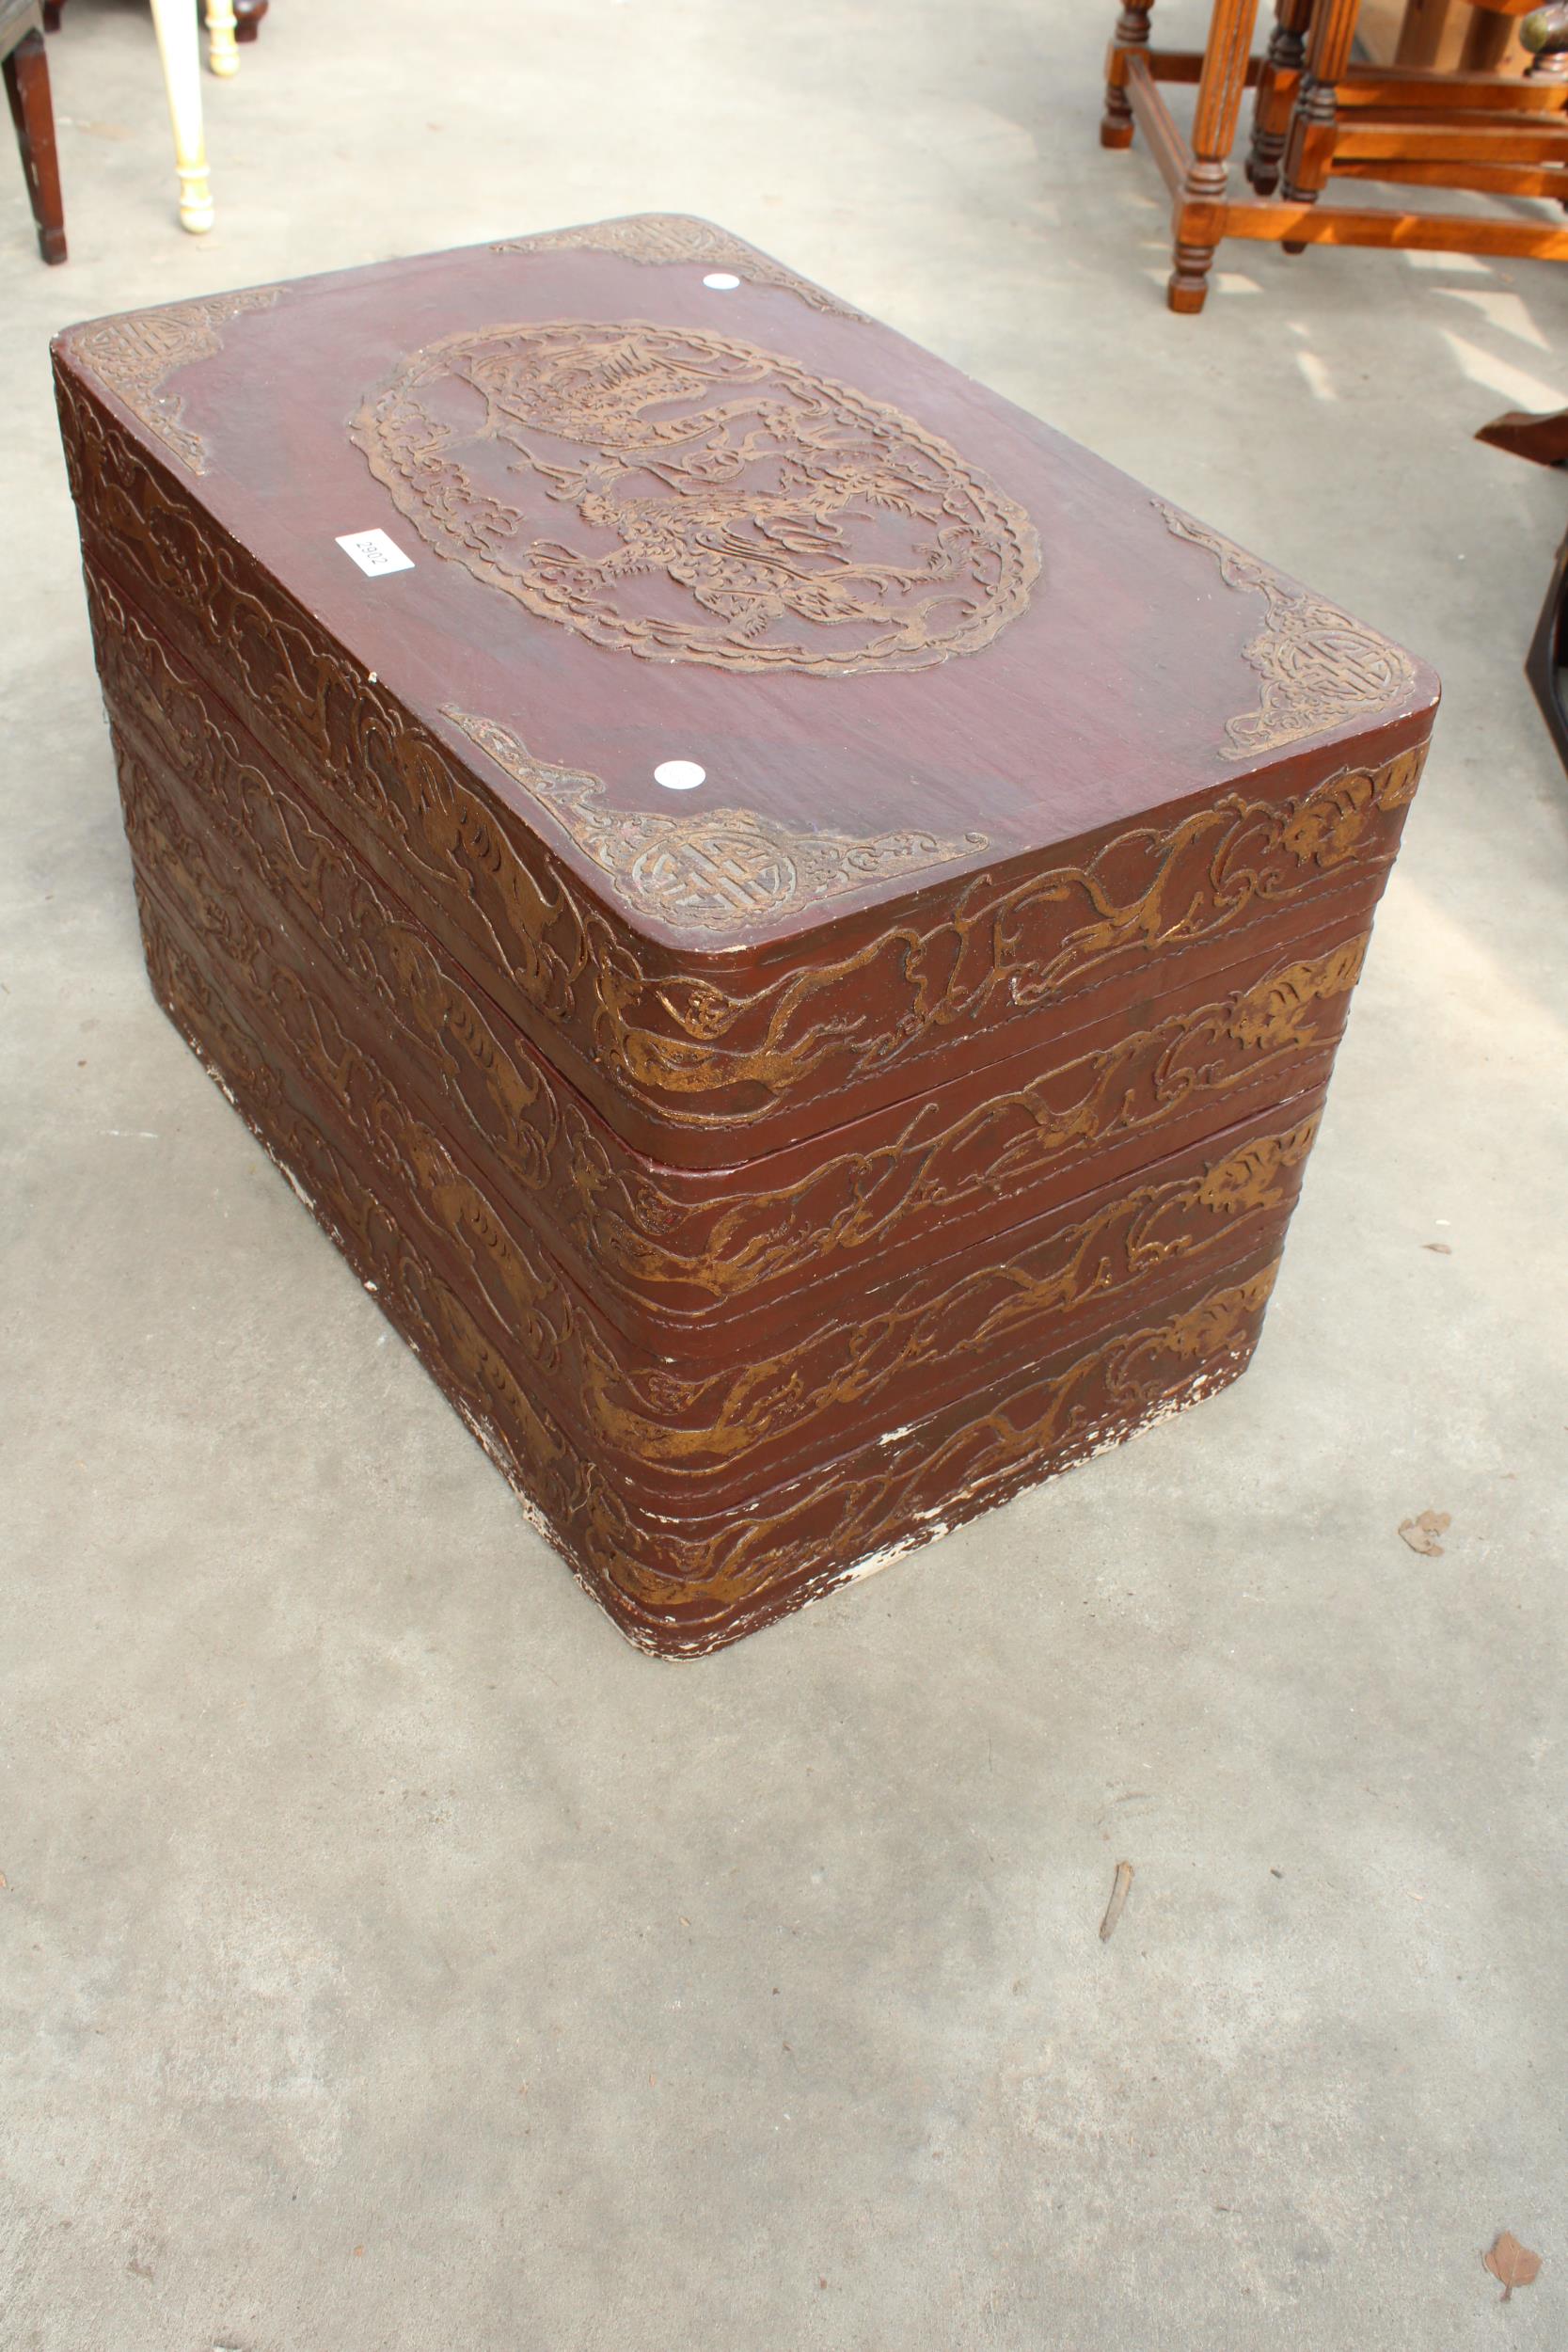 AN ORIENTAL FOUR DIVISION STACKING STORAGE BOXES WITH RAISED GILT DECORATION 24" X 15" AND 16" HIGH